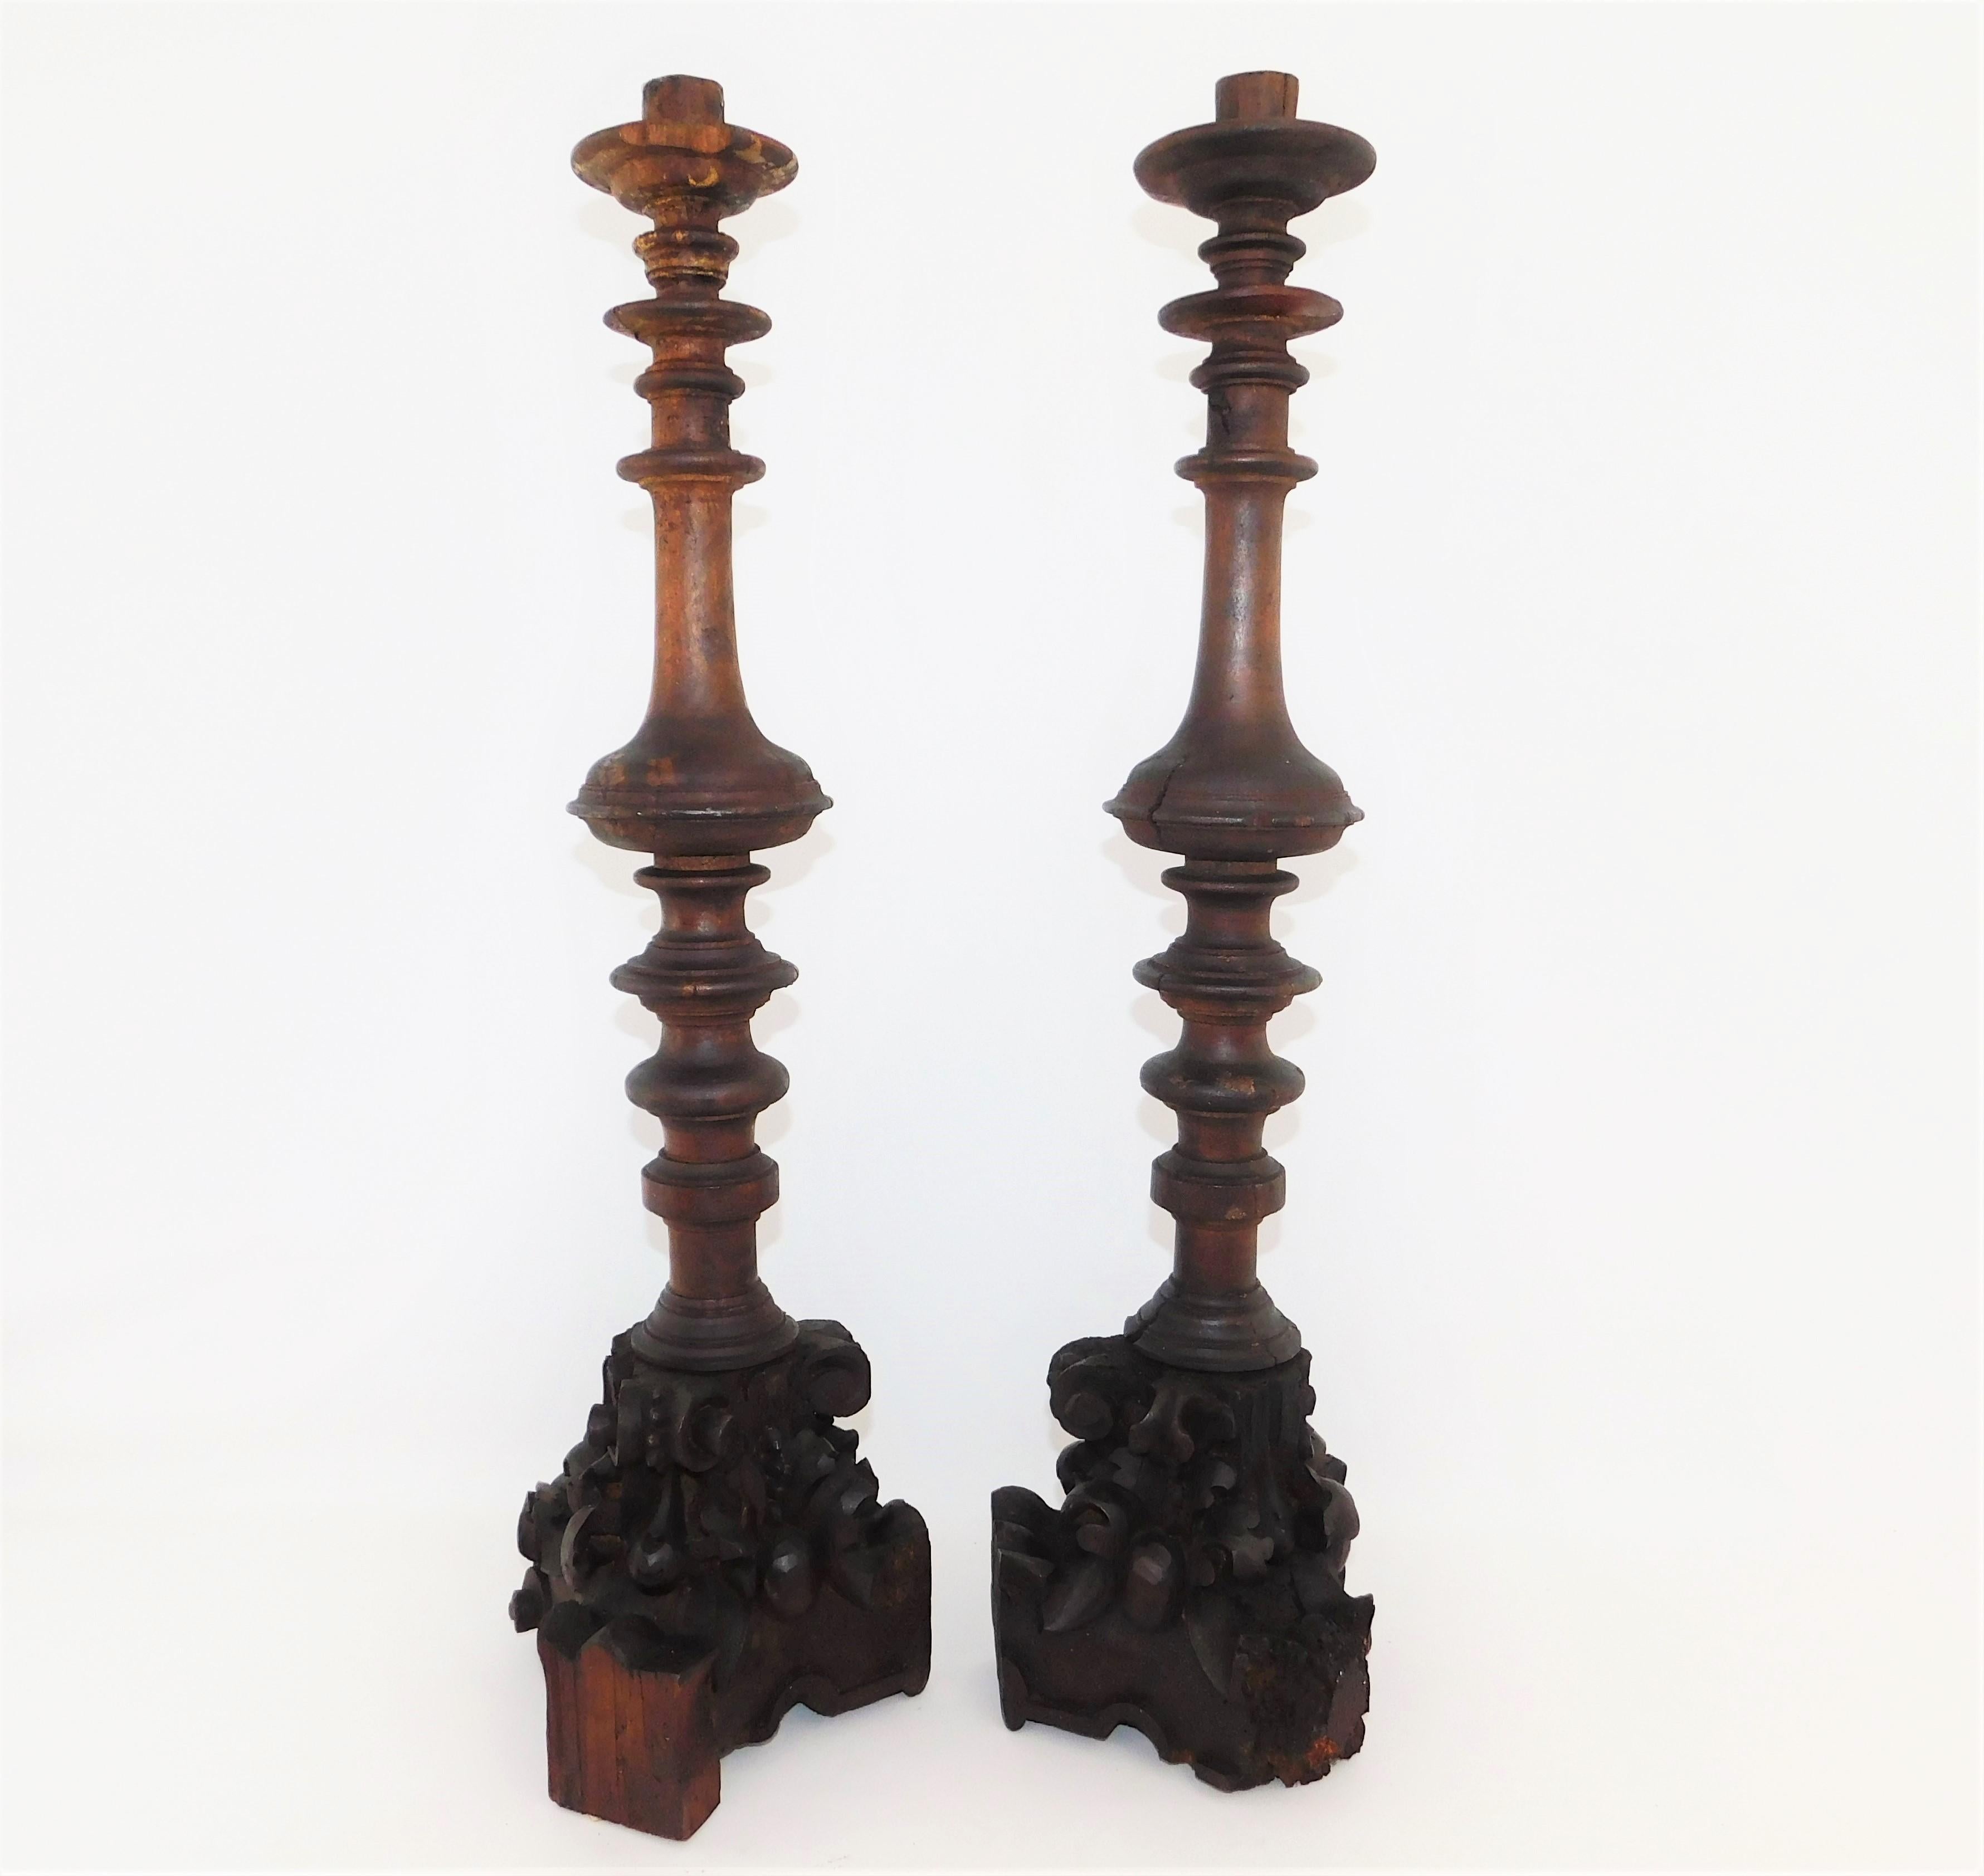 Pair of Tall Mid-19th Century Traditional Rustic Wood Candlesticks For Sale 6